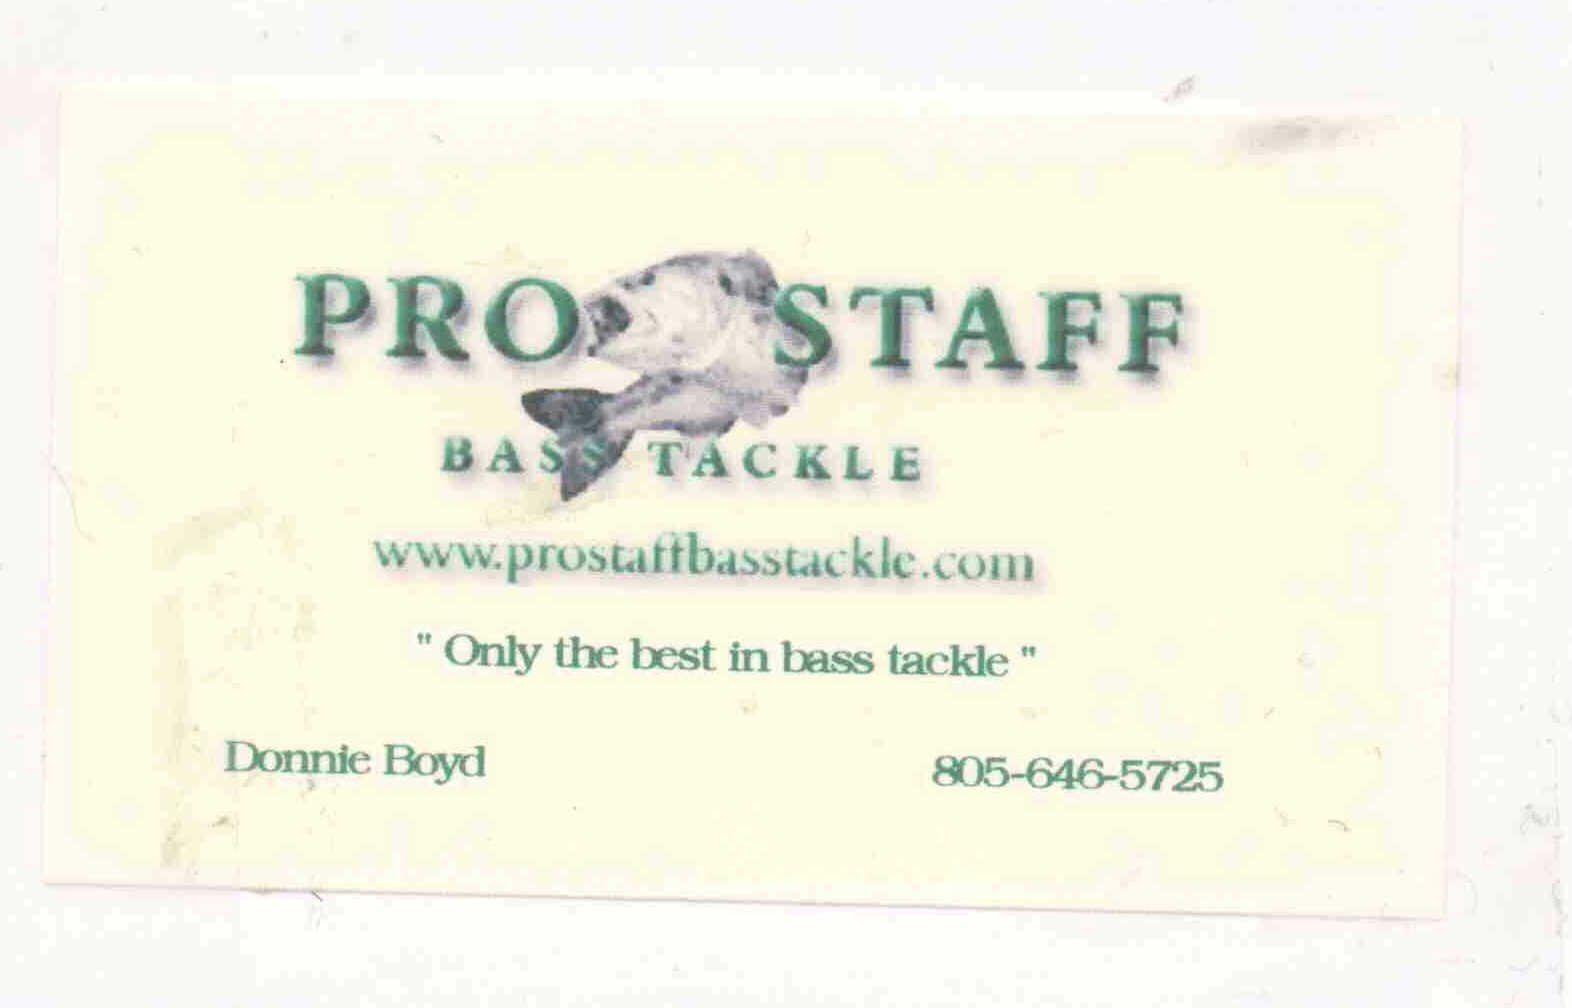  PRO STAFF BASS TACKLE WWW.PROSTAFFBASSTACKLE.COM &quot;ONLY THE BEST IN BASS TACKLE&quot;